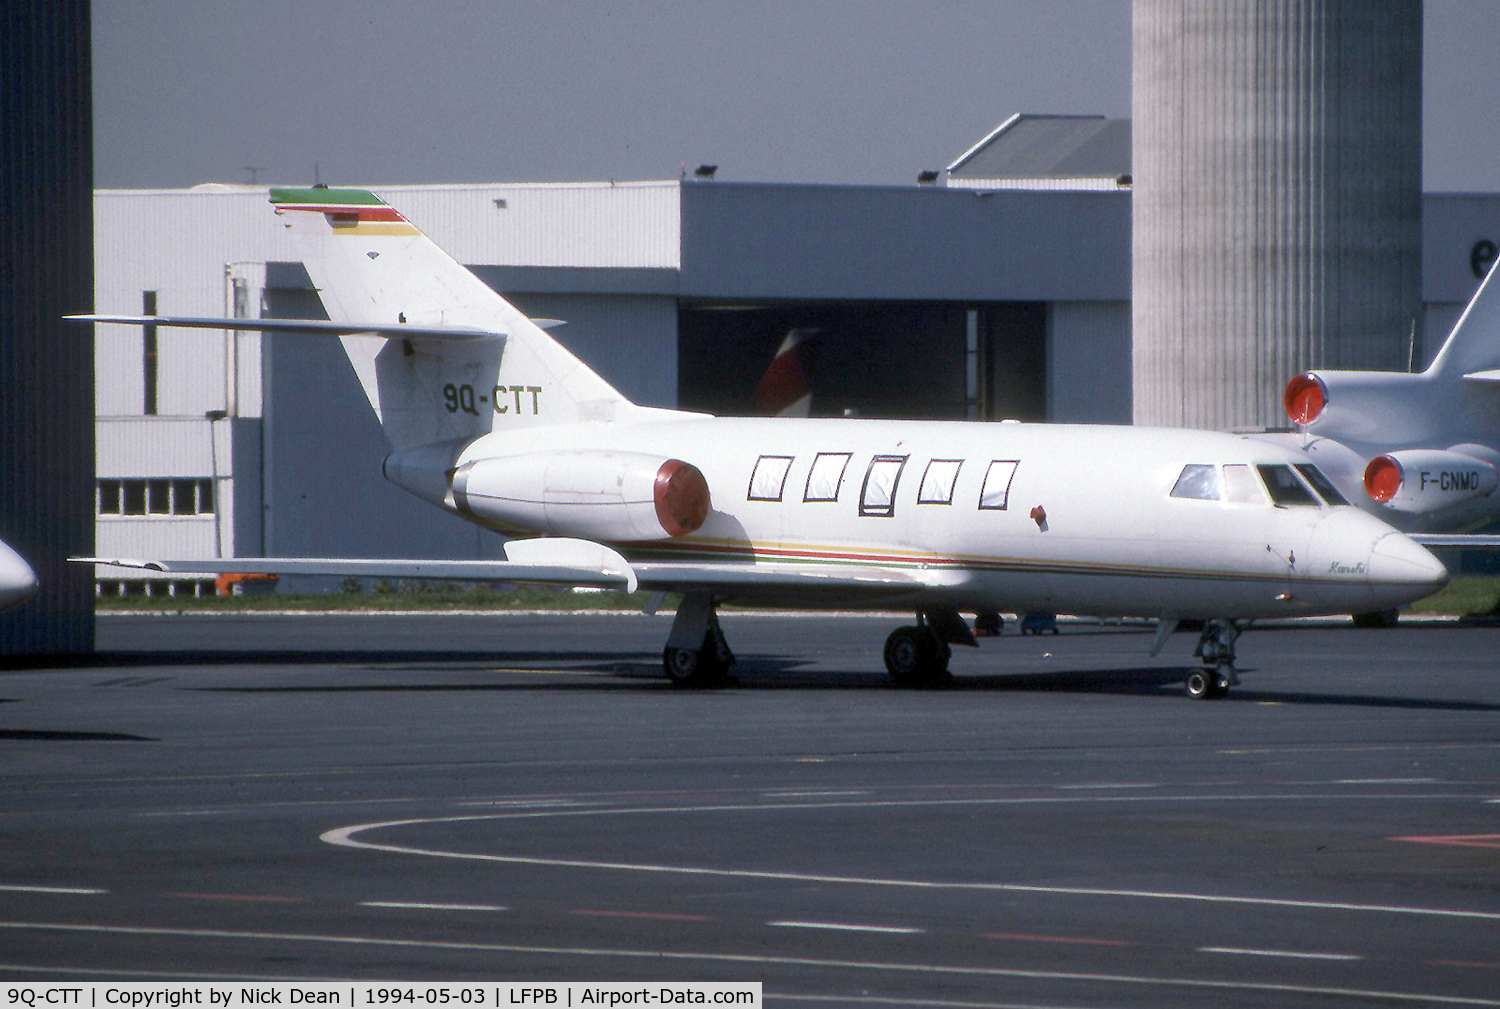 9Q-CTT, Dassault Falcon (Mystere) 20D(F) C/N 193, LFPB (Seen here as 9Q-CTT and later became N219CA of Cherry Air subsequently WFU and stored)